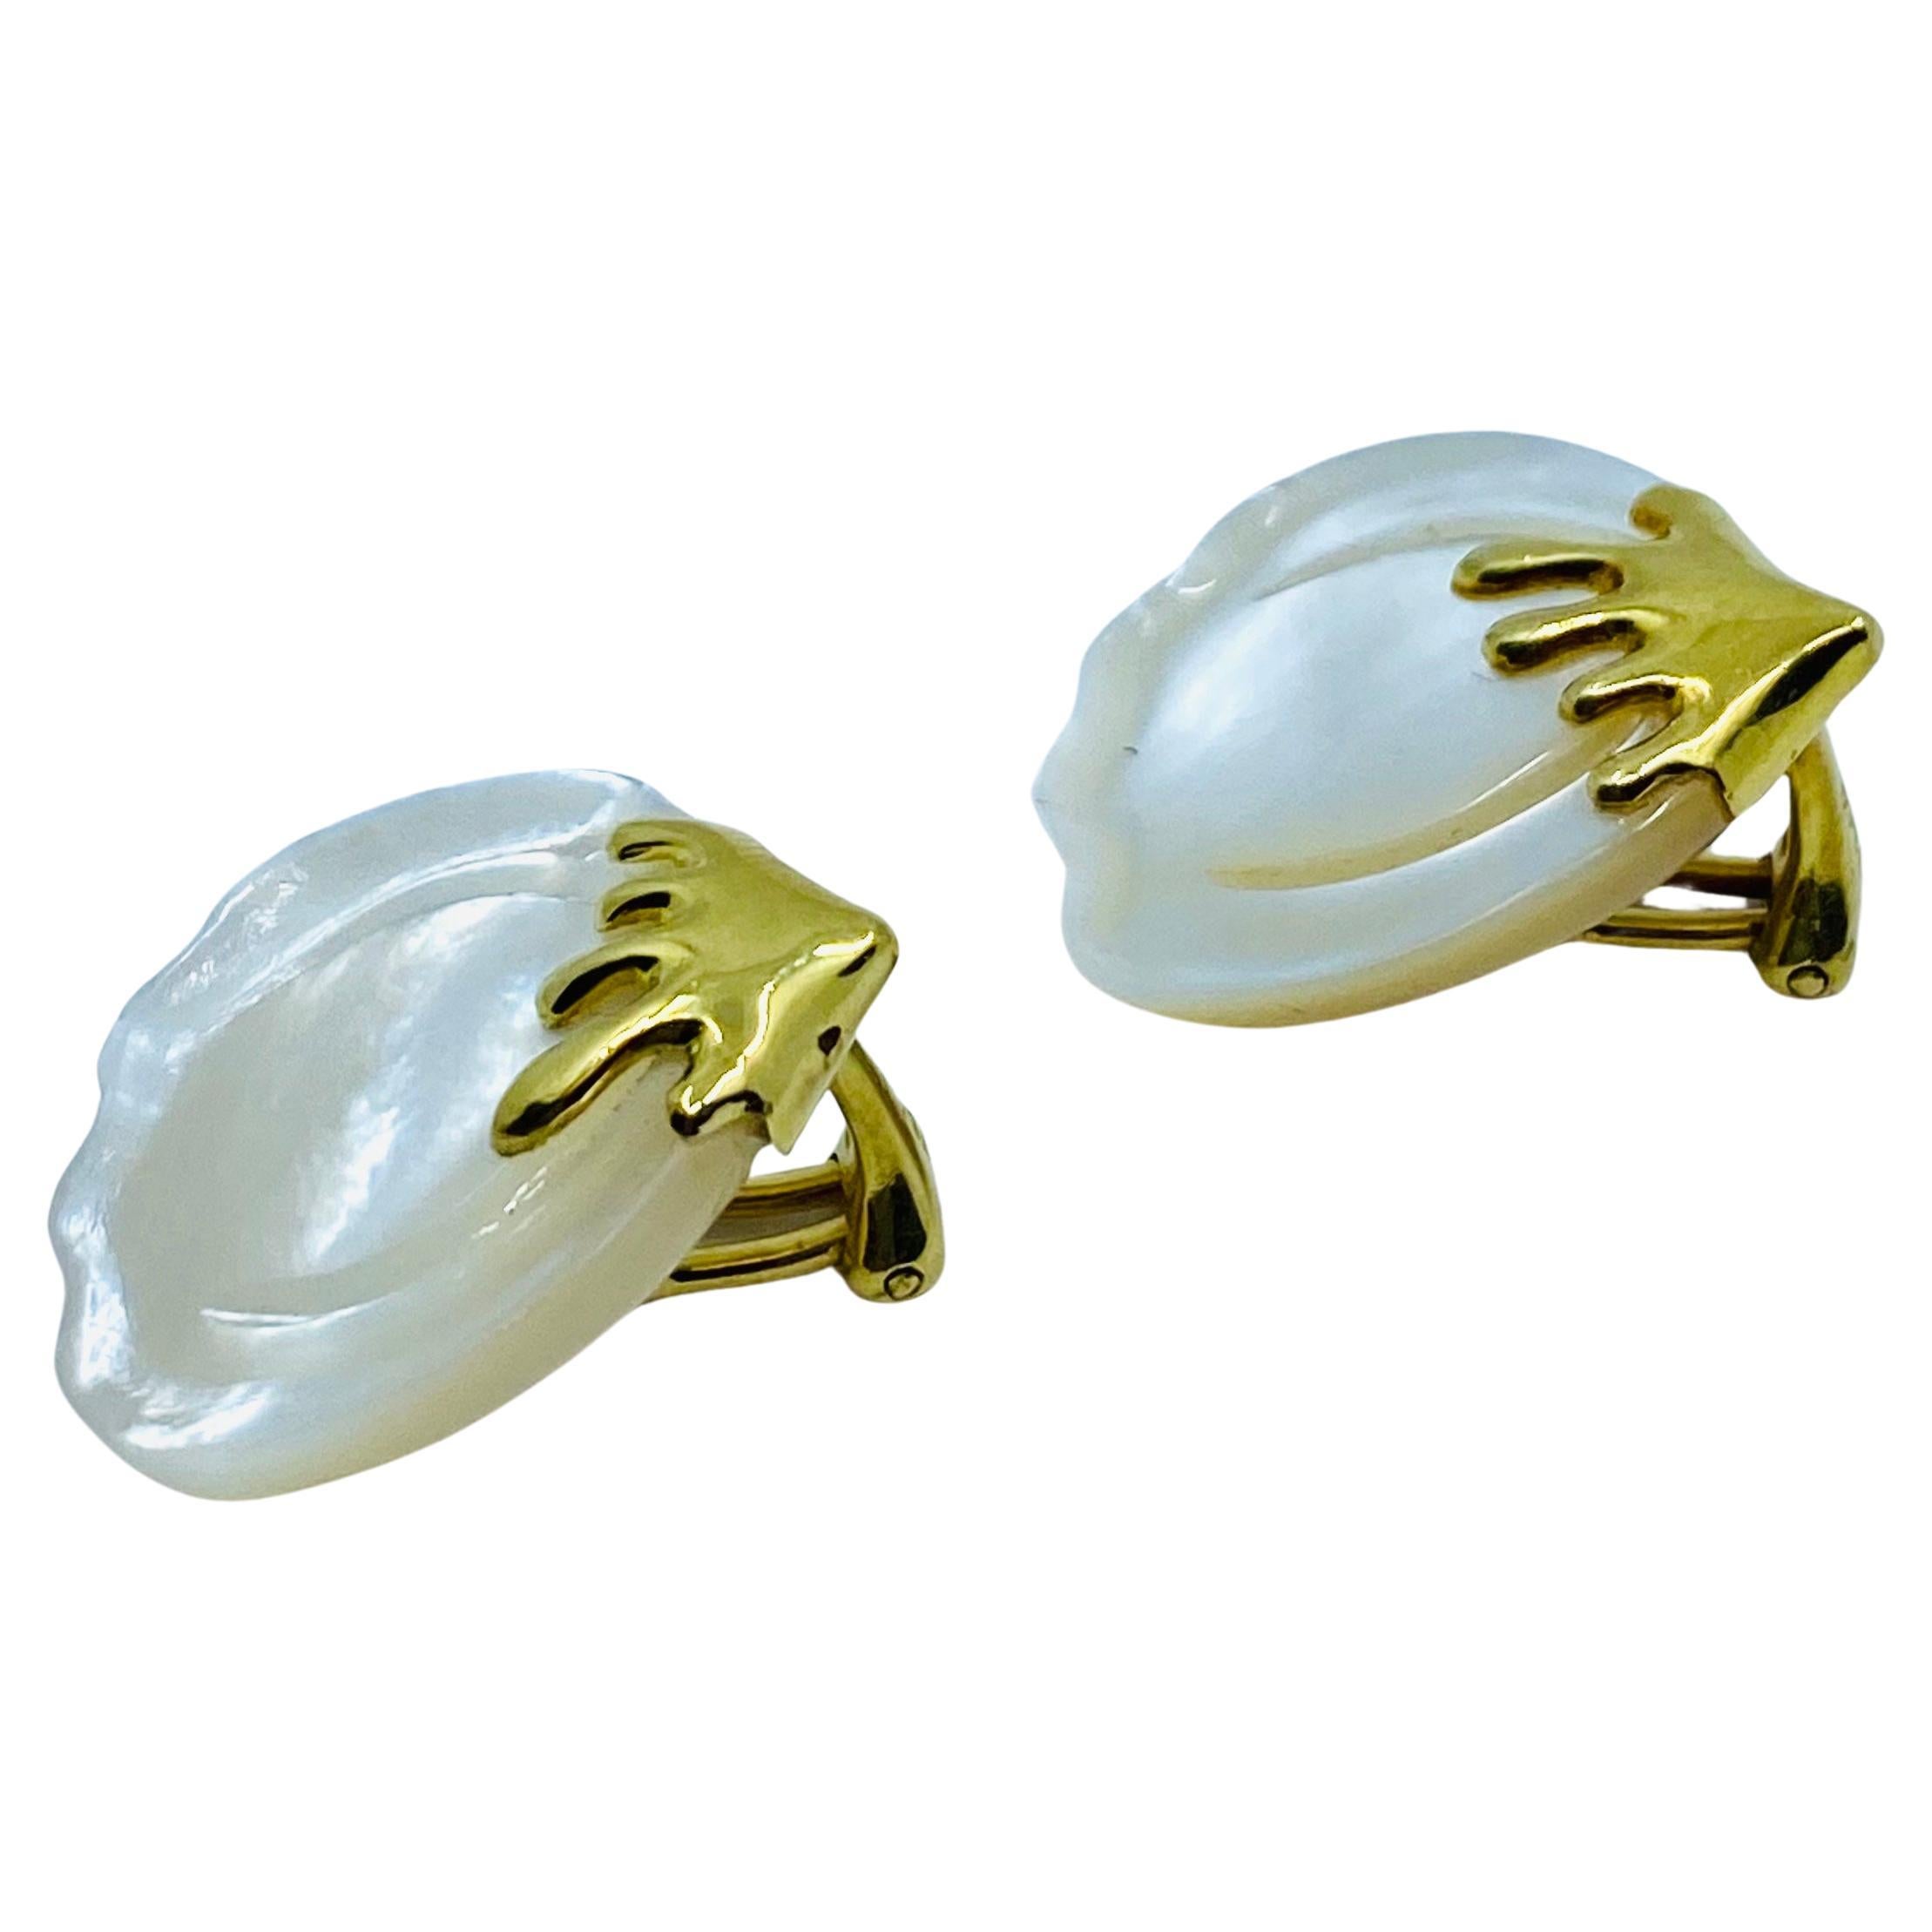 Angela Cummings for Tiffany & Co. Mother of Pearl Gold Earrings 1